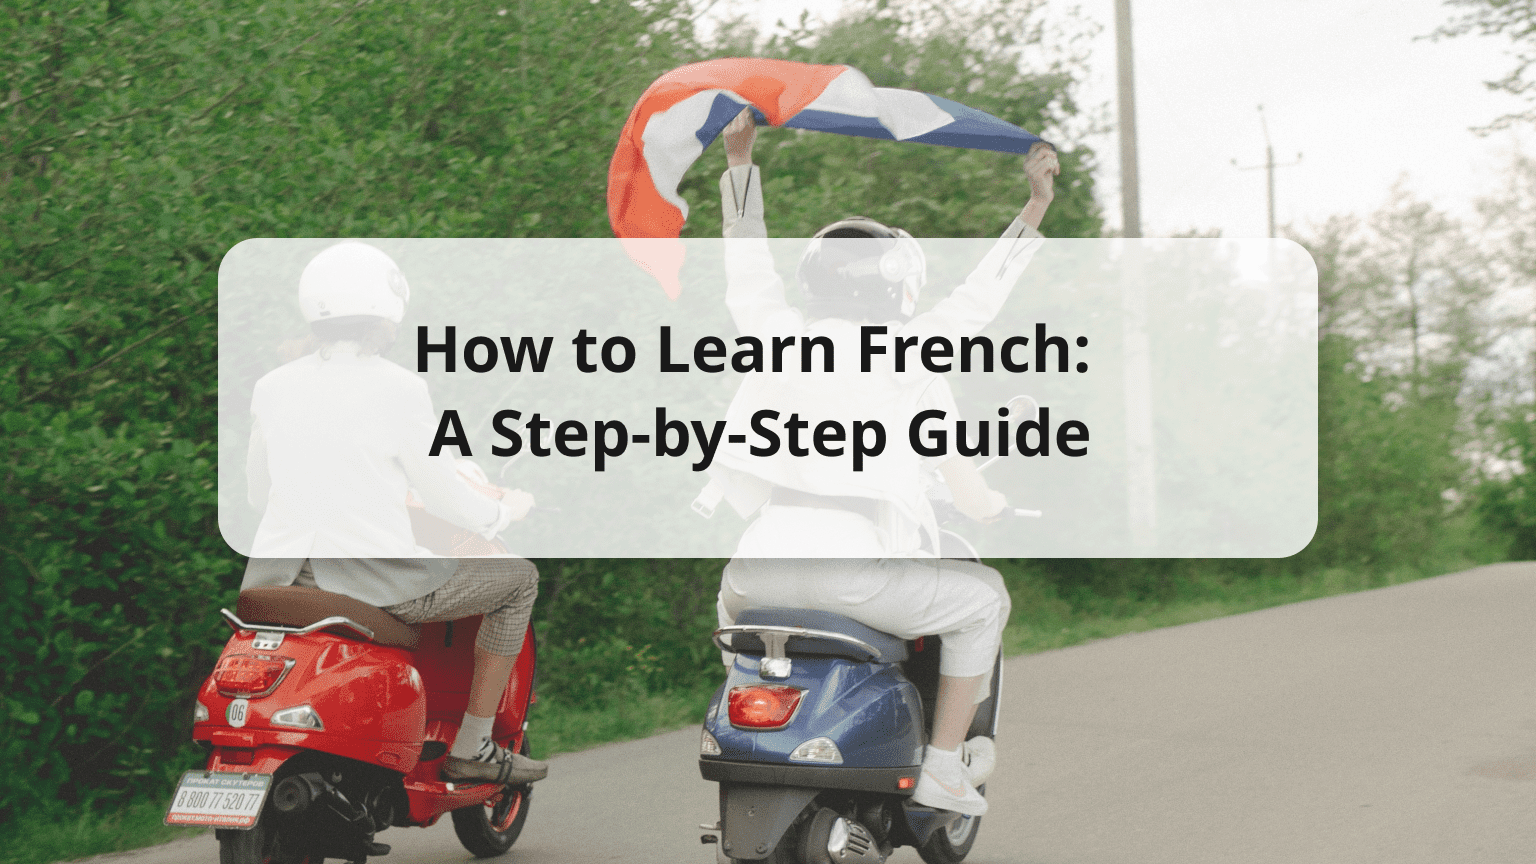 How to Learn French Efficiently: A Step-by-Step Guide for All